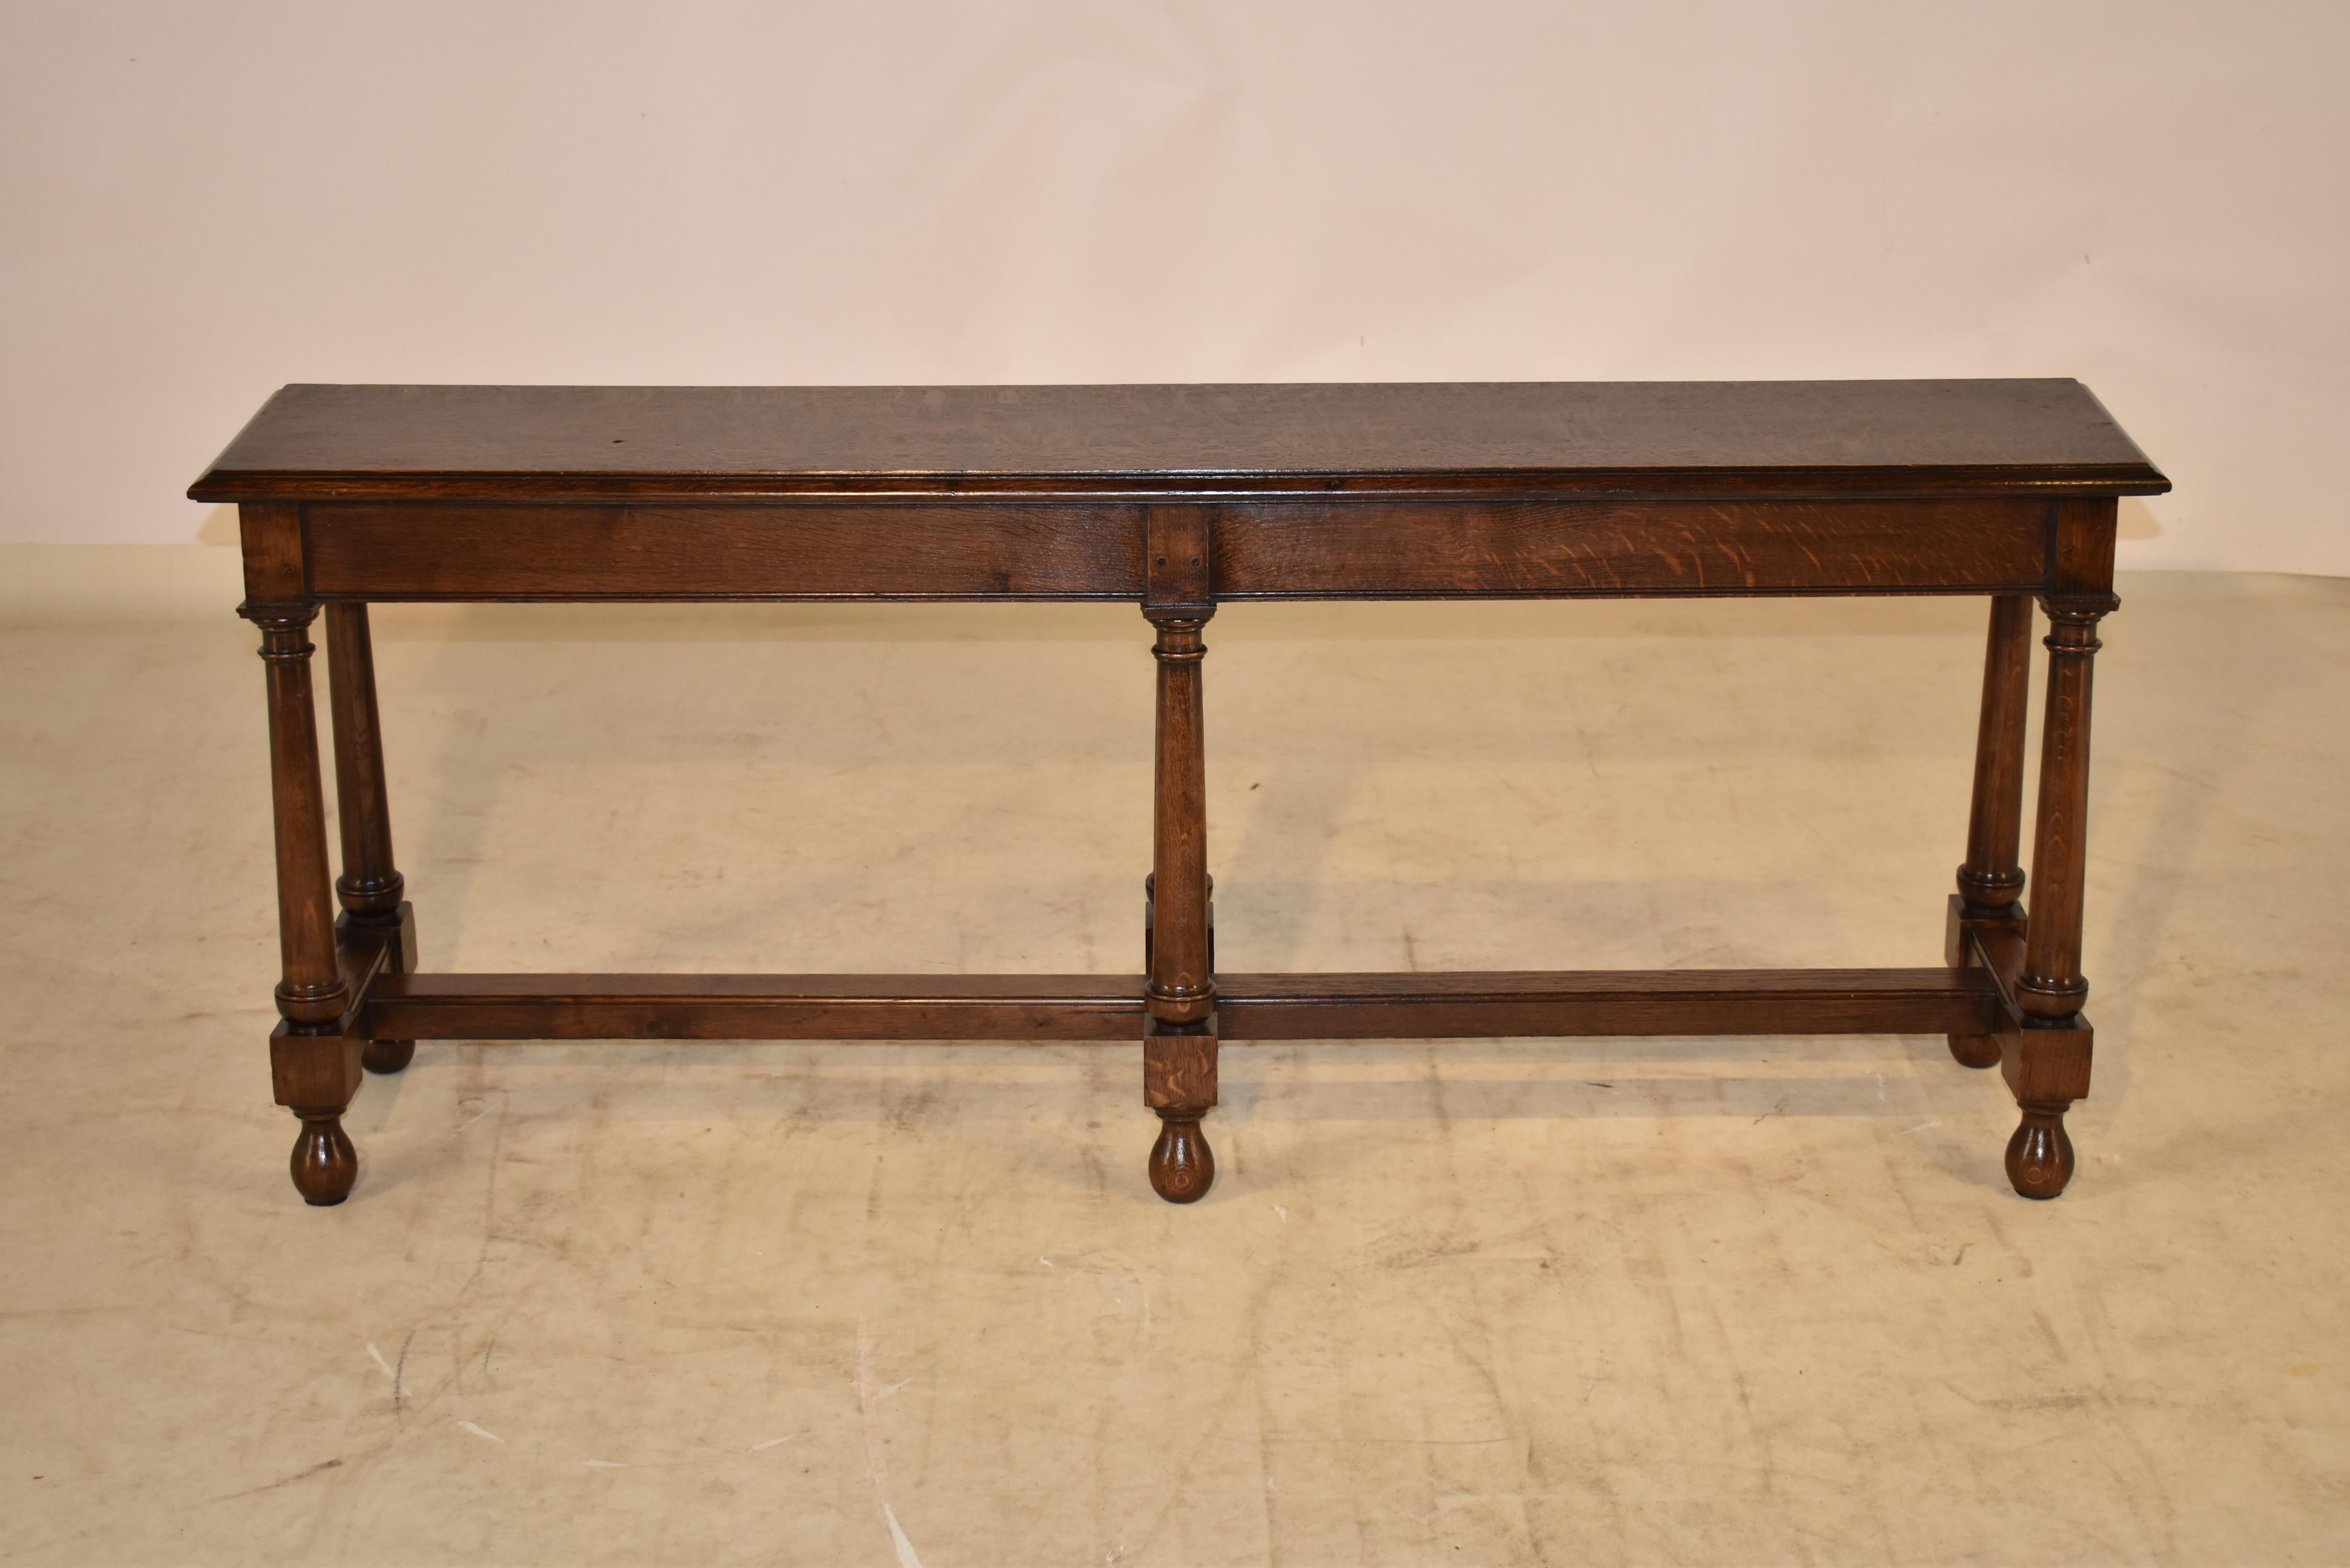 19th century oak joint bench from England with a single plank top which has a beveled edge, following down to a simple apron and supported on splayed legs, joined by simple stretchers and raised on hand turned feet.  